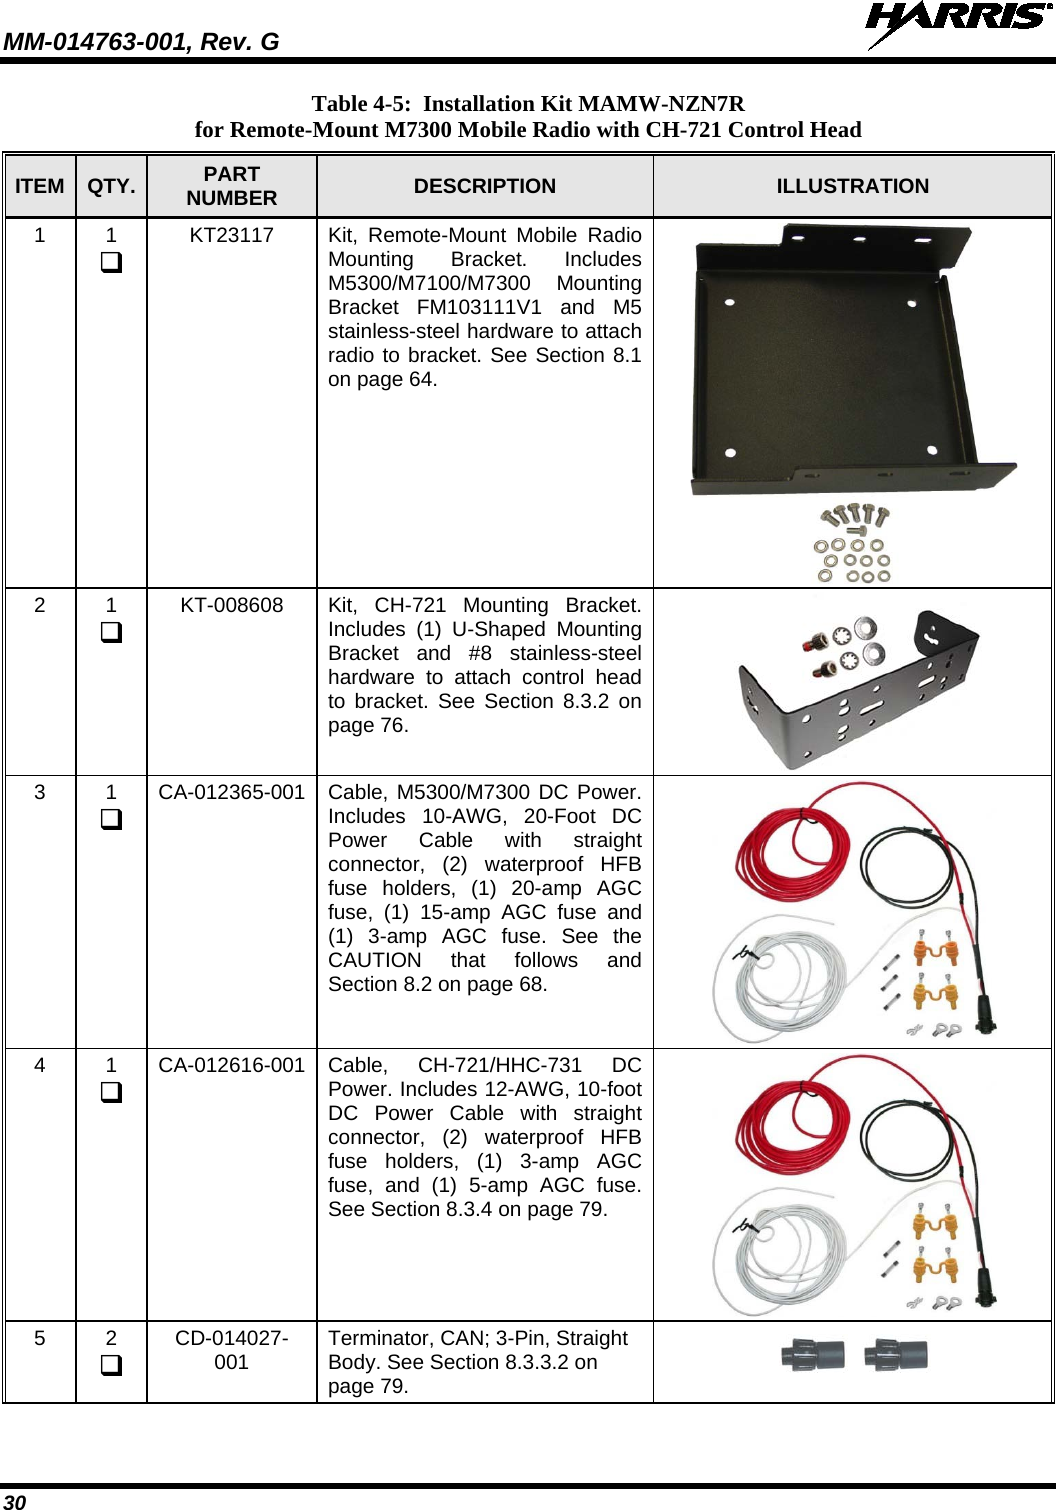 MM-014763-001, Rev. G   30 Table 4-5:  Installation Kit MAMW-NZN7R for Remote-Mount M7300 Mobile Radio with CH-721 Control Head ITEM QTY. PART NUMBER DESCRIPTION  ILLUSTRATION 1  1  KT23117 Kit, Remote-Mount Mobile Radio Mounting Bracket. Includes M5300/M7100/M7300 Mounting Bracket FM103111V1 and M5 stainless-steel hardware to attach radio to bracket. See Section 8.1 on page 64.  2  1  KT-008608 Kit, CH-721 Mounting Bracket. Includes (1) U-Shaped Mounting Bracket and #8 stainless-steel hardware to attach control head to bracket. See Section 8.3.2 on page 76.  3  1  CA-012365-001 Cable, M5300/M7300 DC Power. Includes 10-AWG, 20-Foot DC Power Cable with straight connector, (2) waterproof HFB fuse holders, (1)  20-amp AGC fuse,  (1) 15-amp AGC fuse and (1) 3-amp AGC fuse. See  the CAUTION that follows and Section 8.2 on page 68.  4  1  CA-012616-001 Cable, CH-721/HHC-731 DC Power. Includes 12-AWG, 10-foot DC Power Cable with straight connector, (2) waterproof HFB fuse holders, (1) 3-amp AGC fuse, and (1) 5-amp AGC fuse. See Section 8.3.4 on page 79.  5  2  CD-014027-001 Terminator, CAN; 3-Pin, Straight Body. See Section 8.3.3.2 on page 79.       